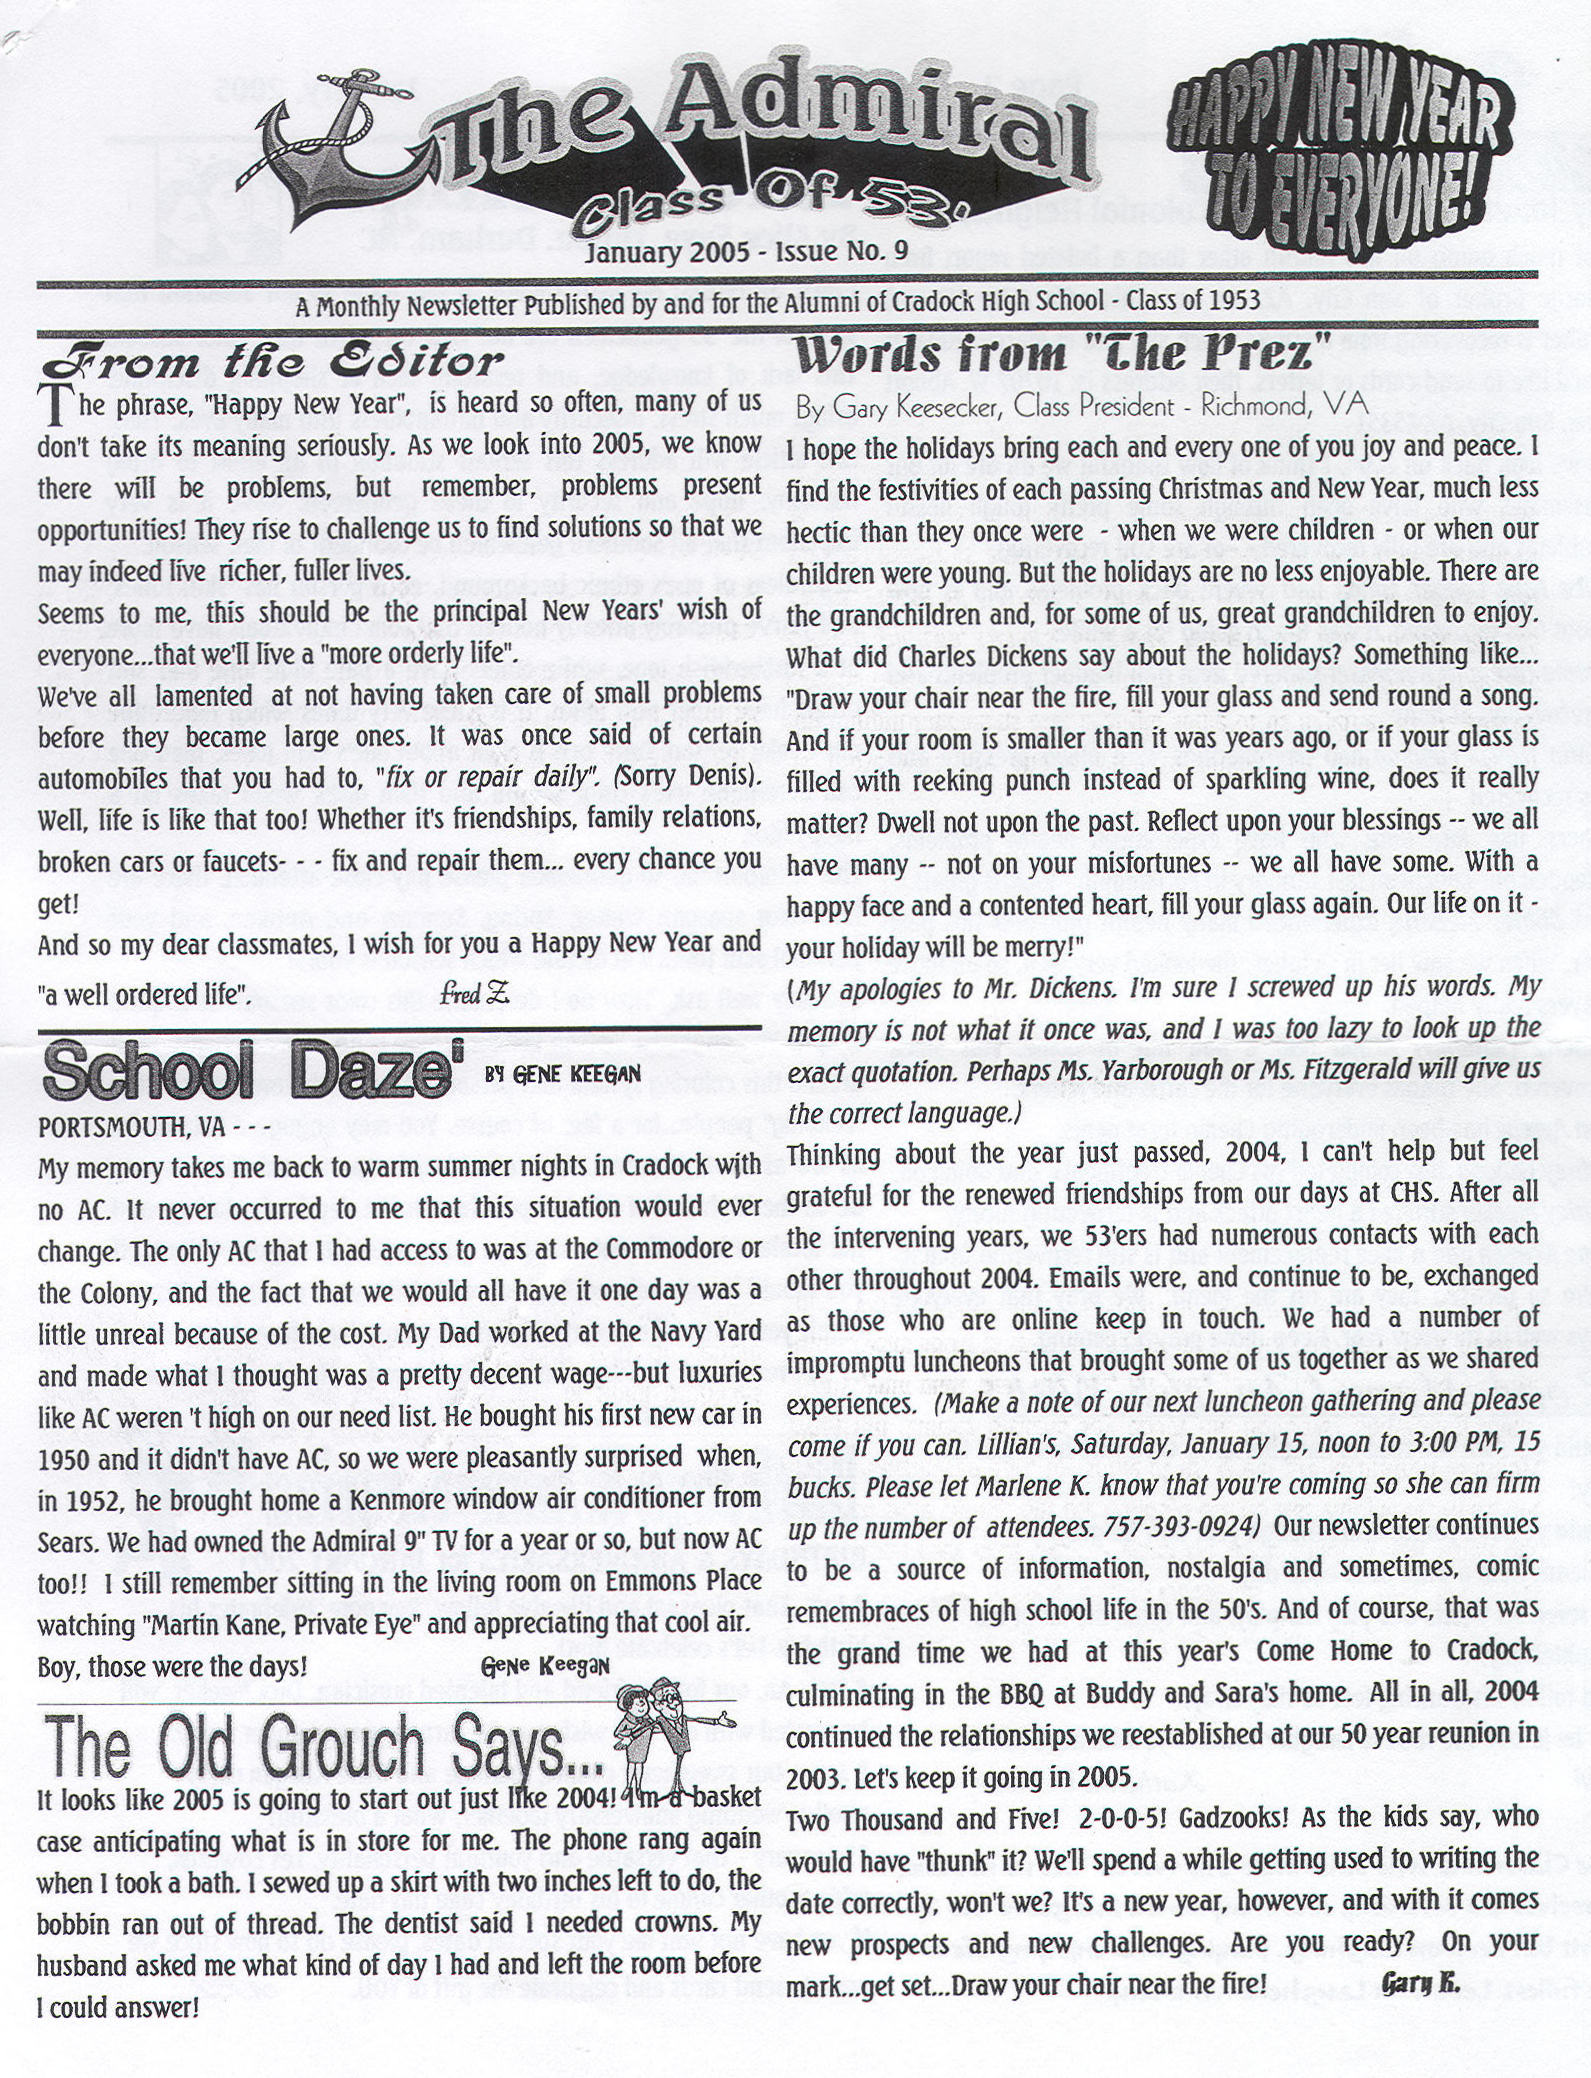 The Admiral - Jan. 2005 - pg. 1